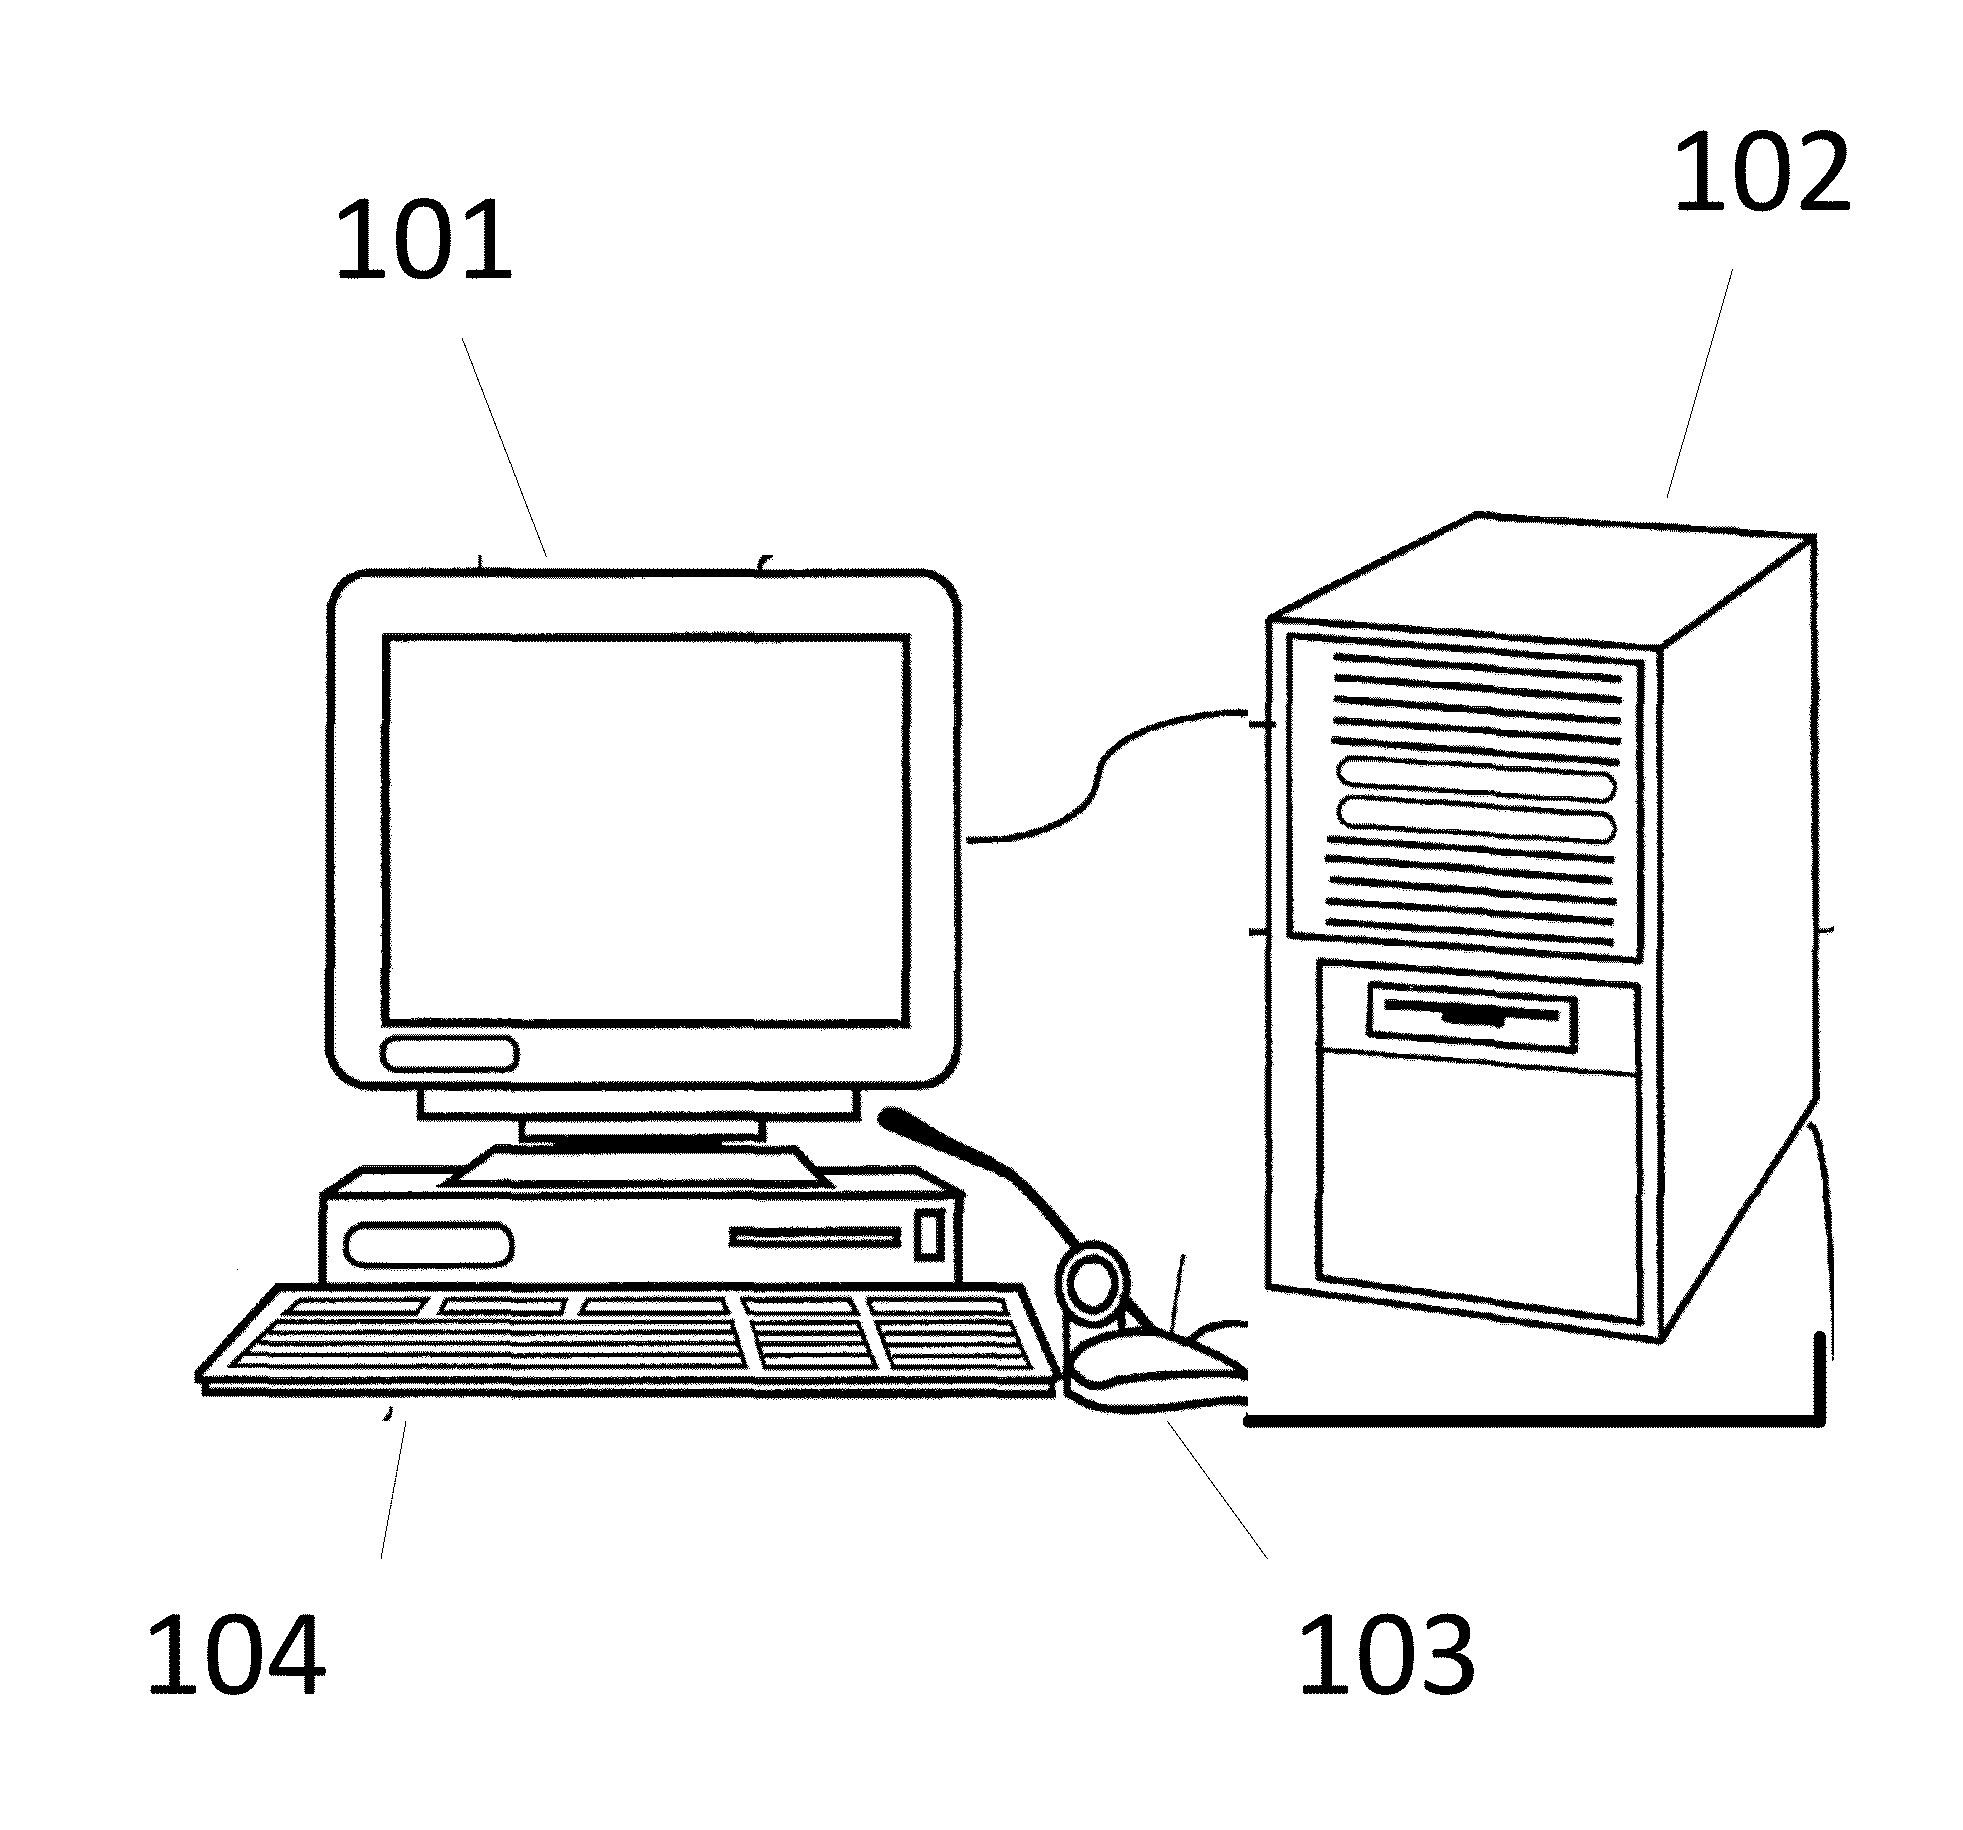 System and Method for Interactive Identification and Matching of Funding and/or Advisory Seekers and Funding and/or Advisory Providers